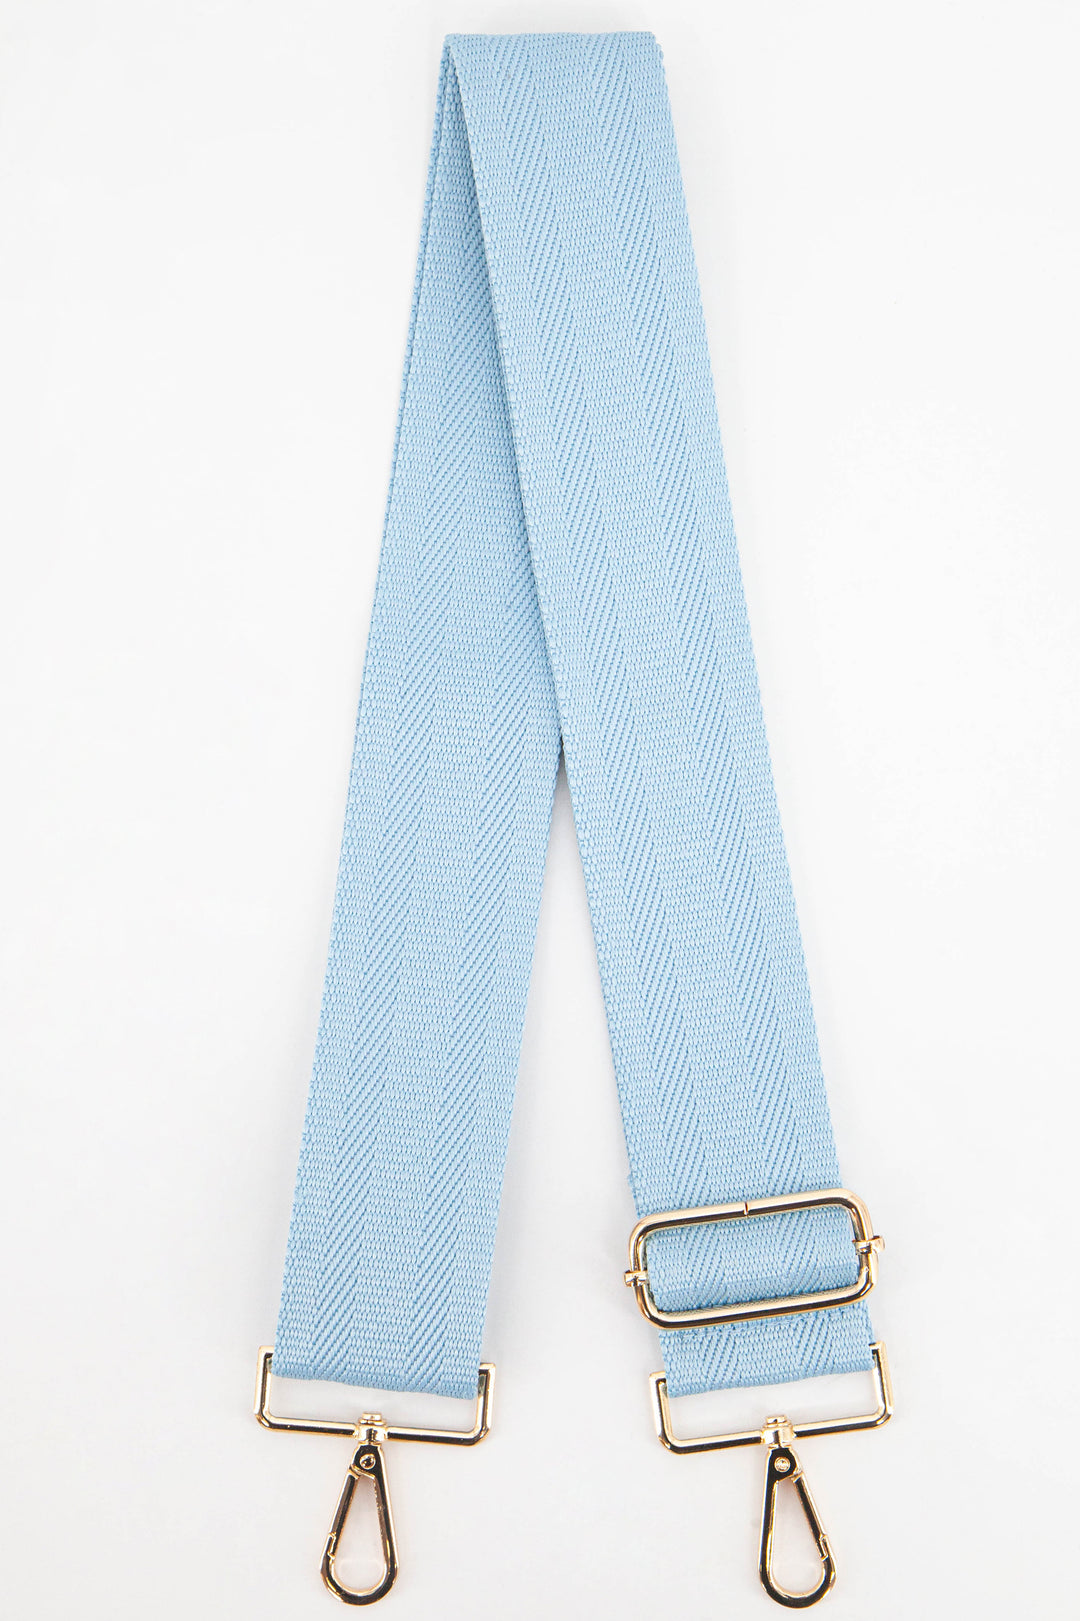 plain light blue clip on bag strap in a textured orange woven material with gold hardware